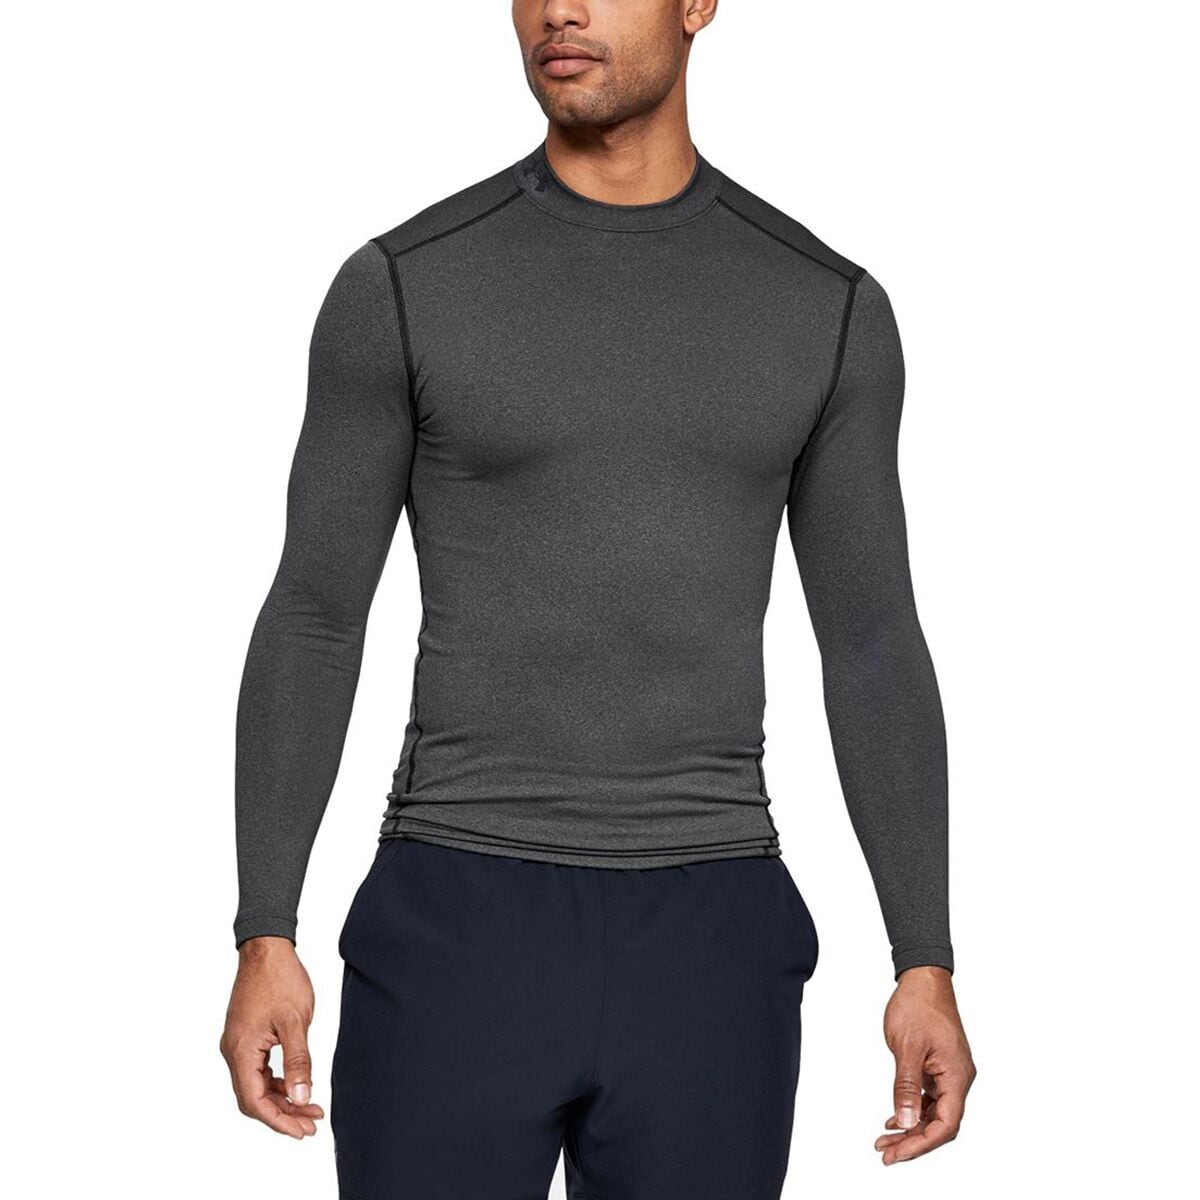 short sleeve coldgear compression , Up to 65% OFF,www.casperservis.com.tr